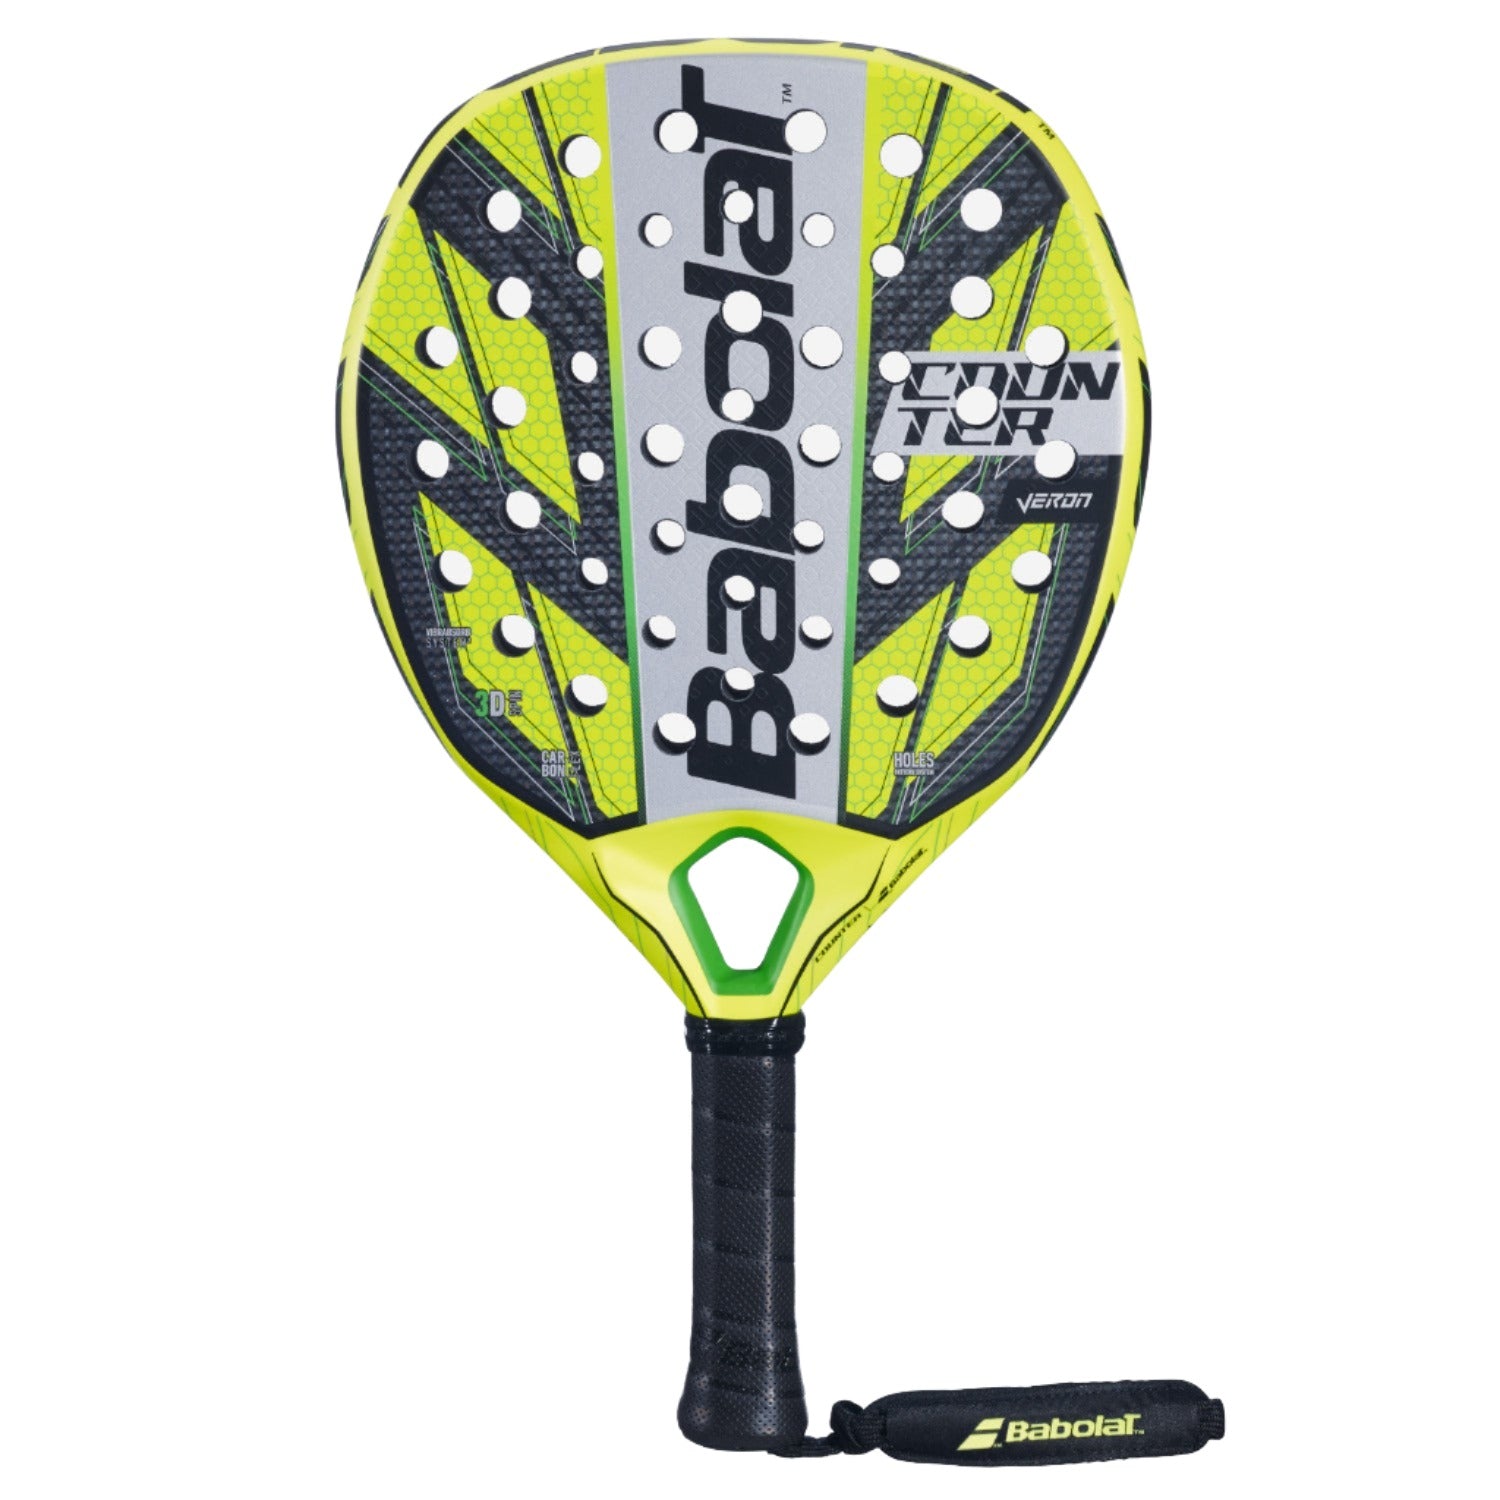 Front image of the Babolat Counter Veron 2023 padel racket on sale at Thepadelshop.co.nz